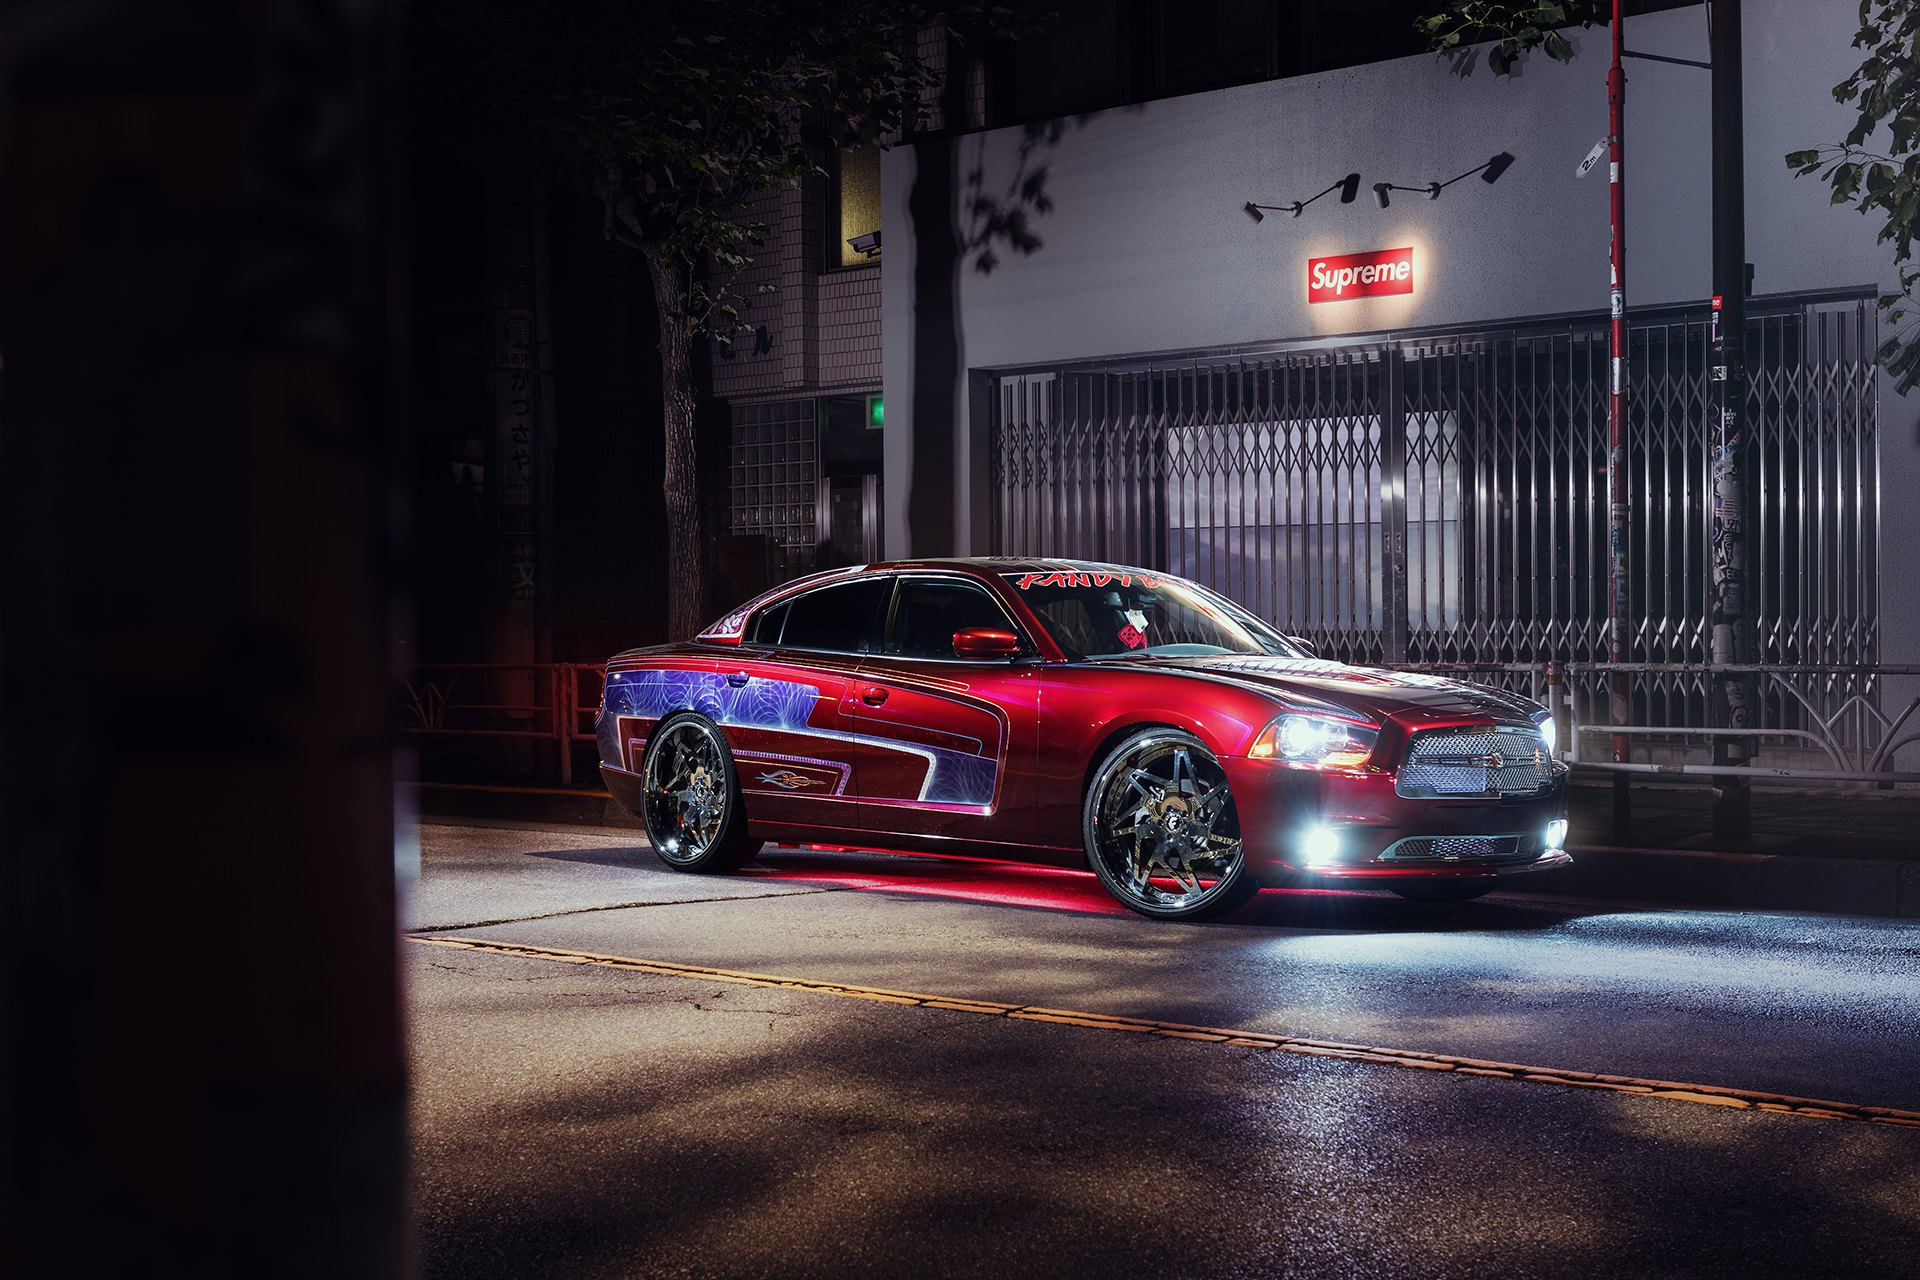 Aftermarket Headlights on Red Dodge Charger - Photo by Forgiato